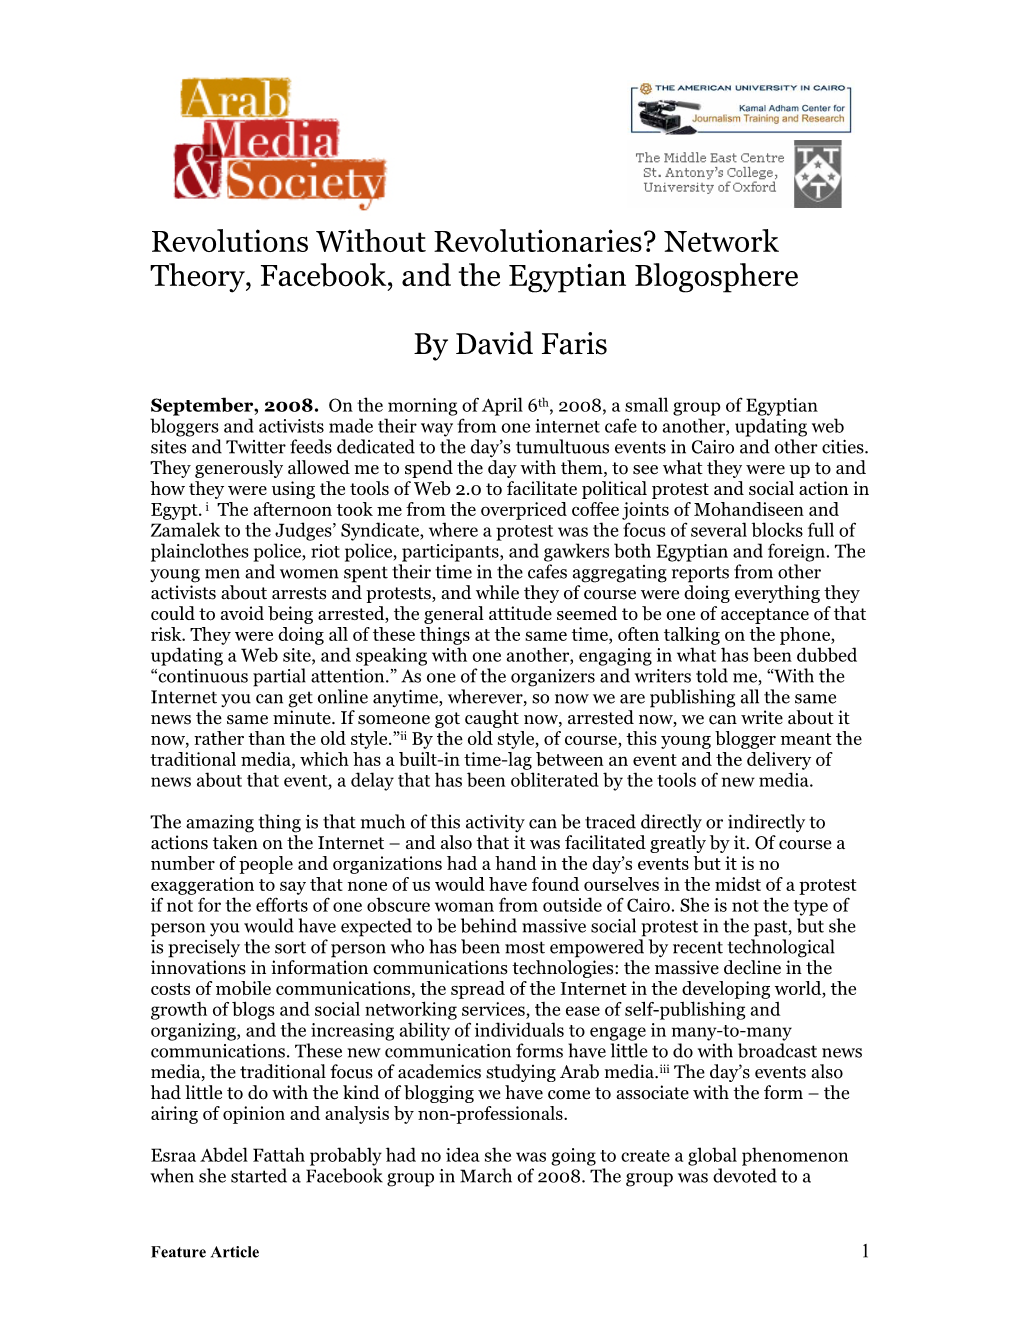 Revolutions Without Revolutionaries? Network Theory, Facebook, and the Egyptian Blogosphere by David Faris